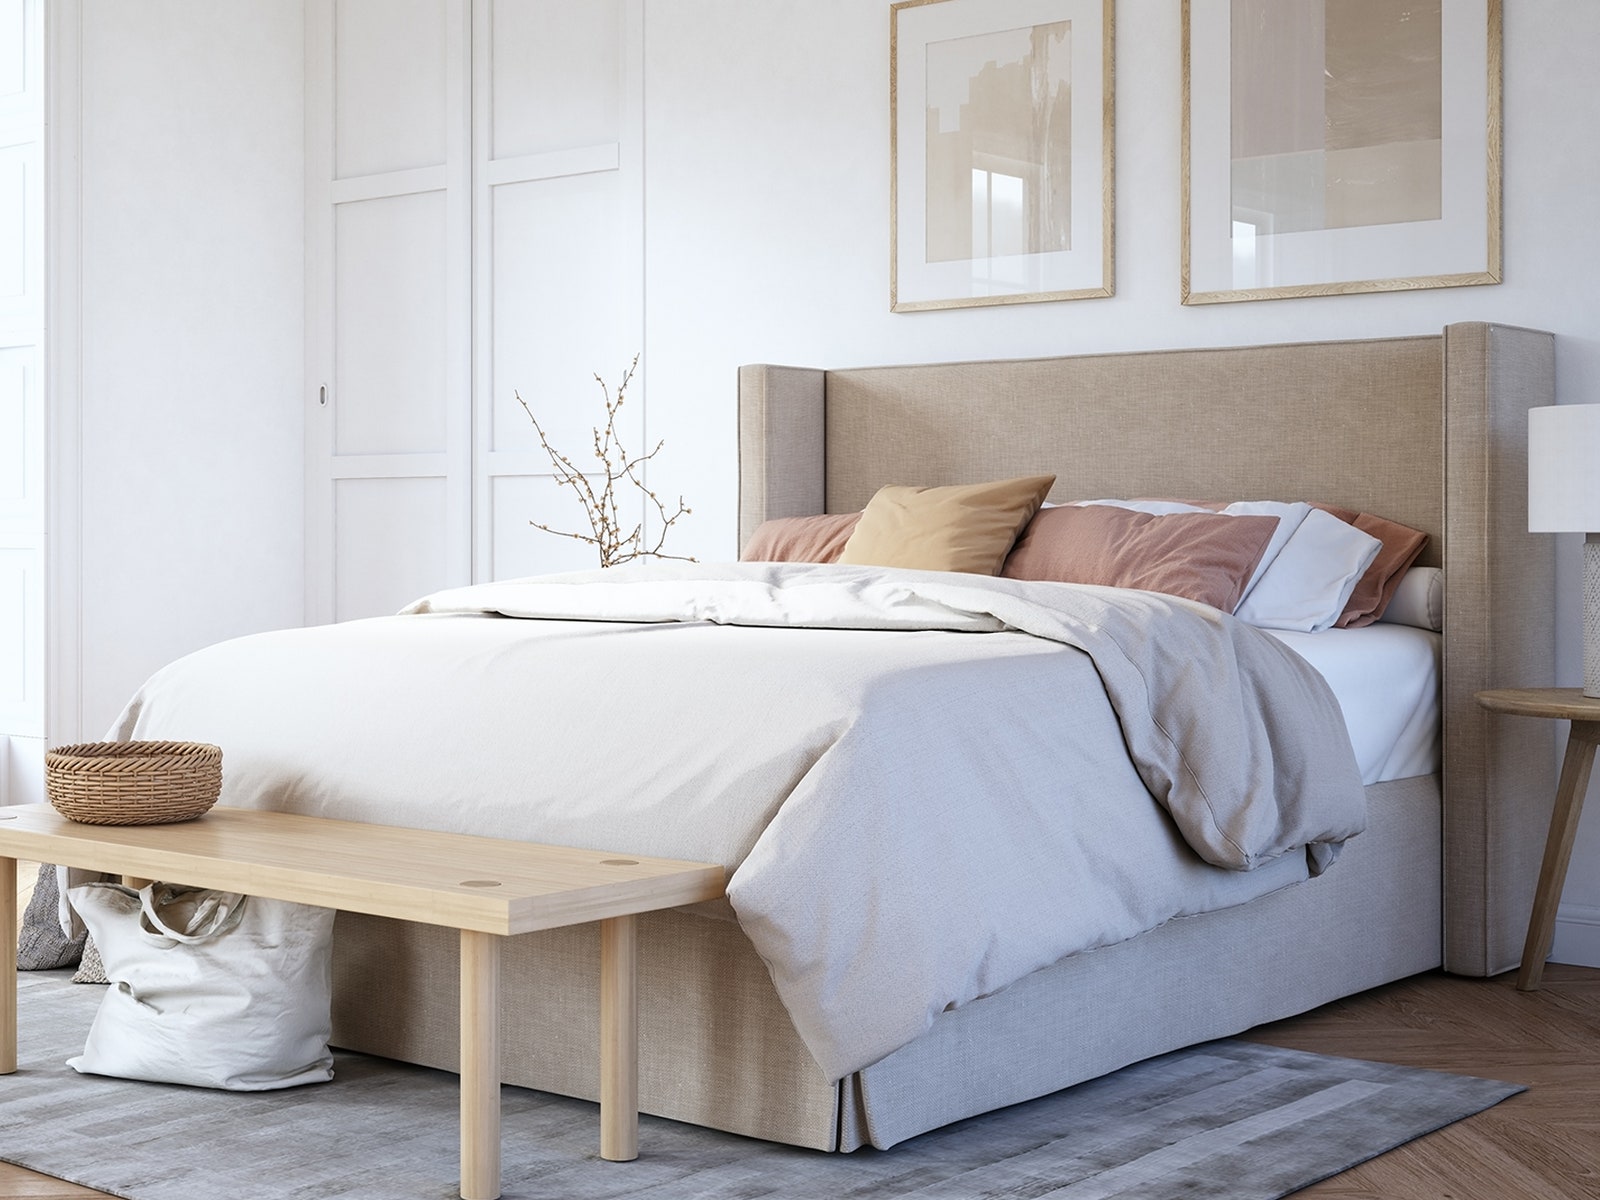 These ottoman beds will make saving space endlessly easier